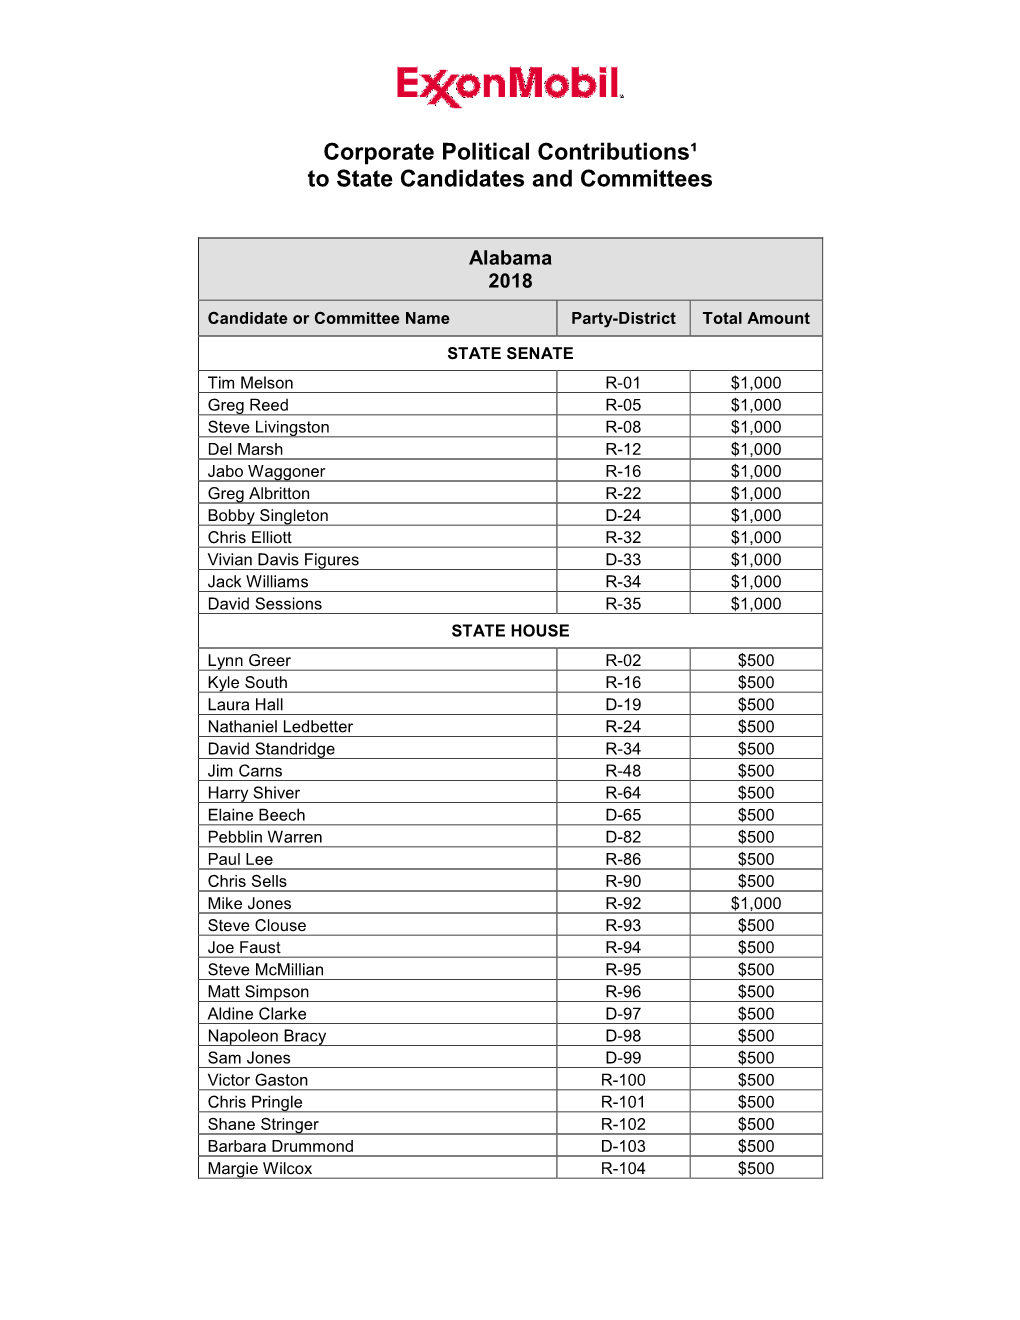 2018 Corporate Political Contributions to State Candidates and Committees